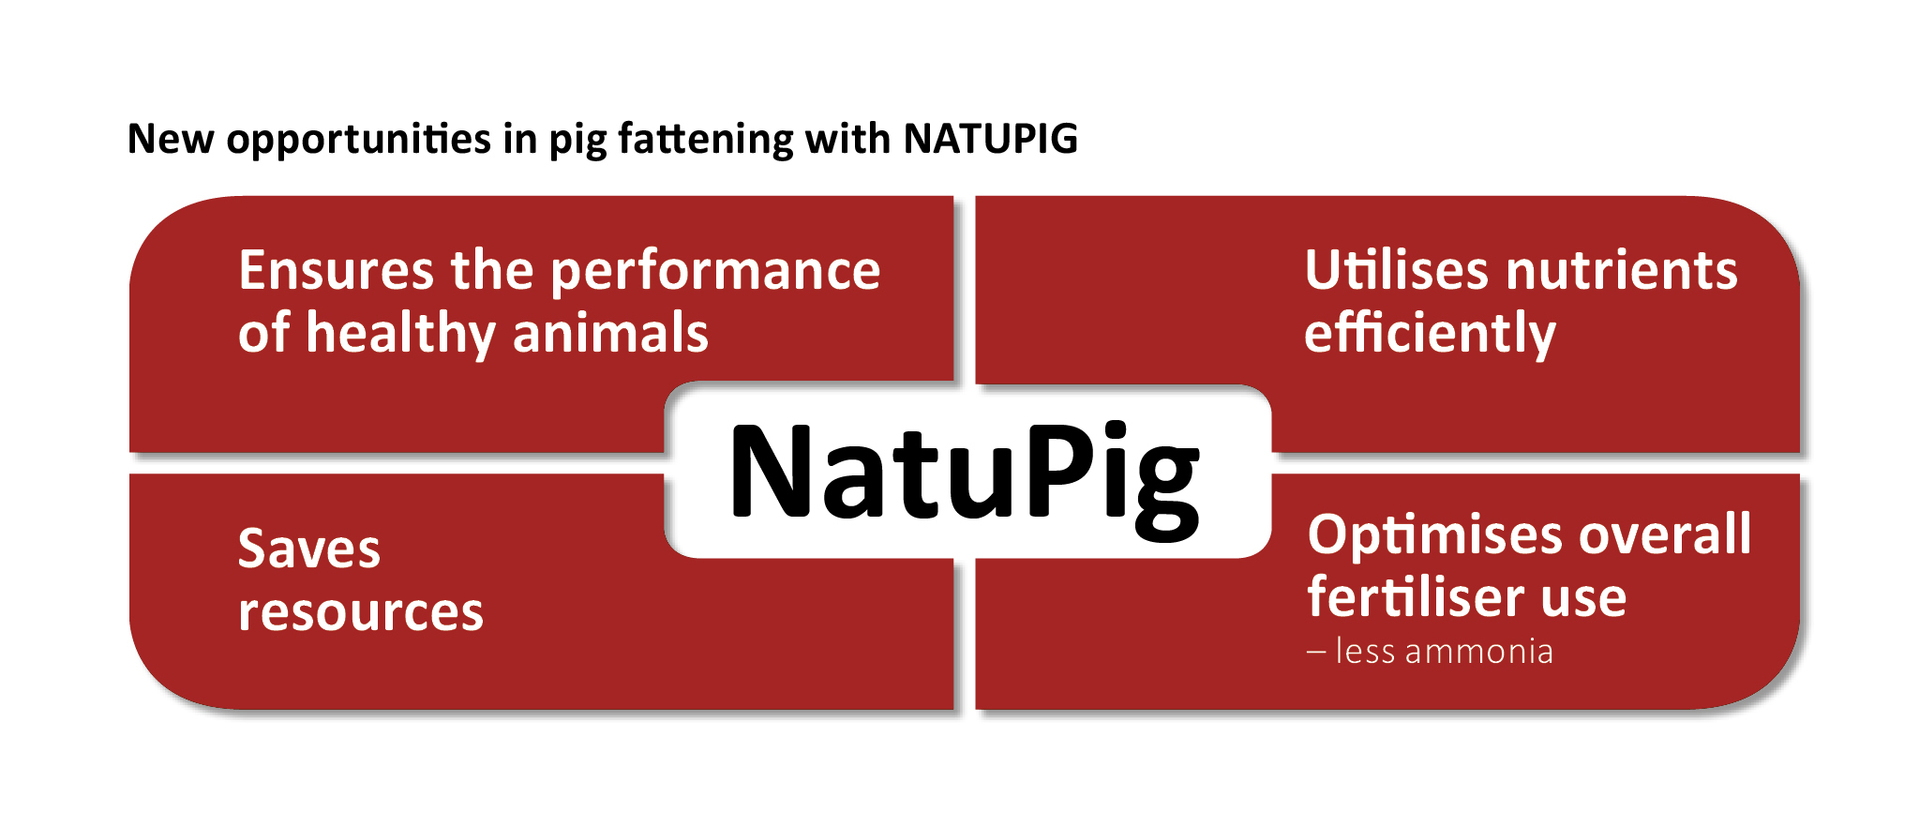 Opportunities in pig fattening with NATUPIG